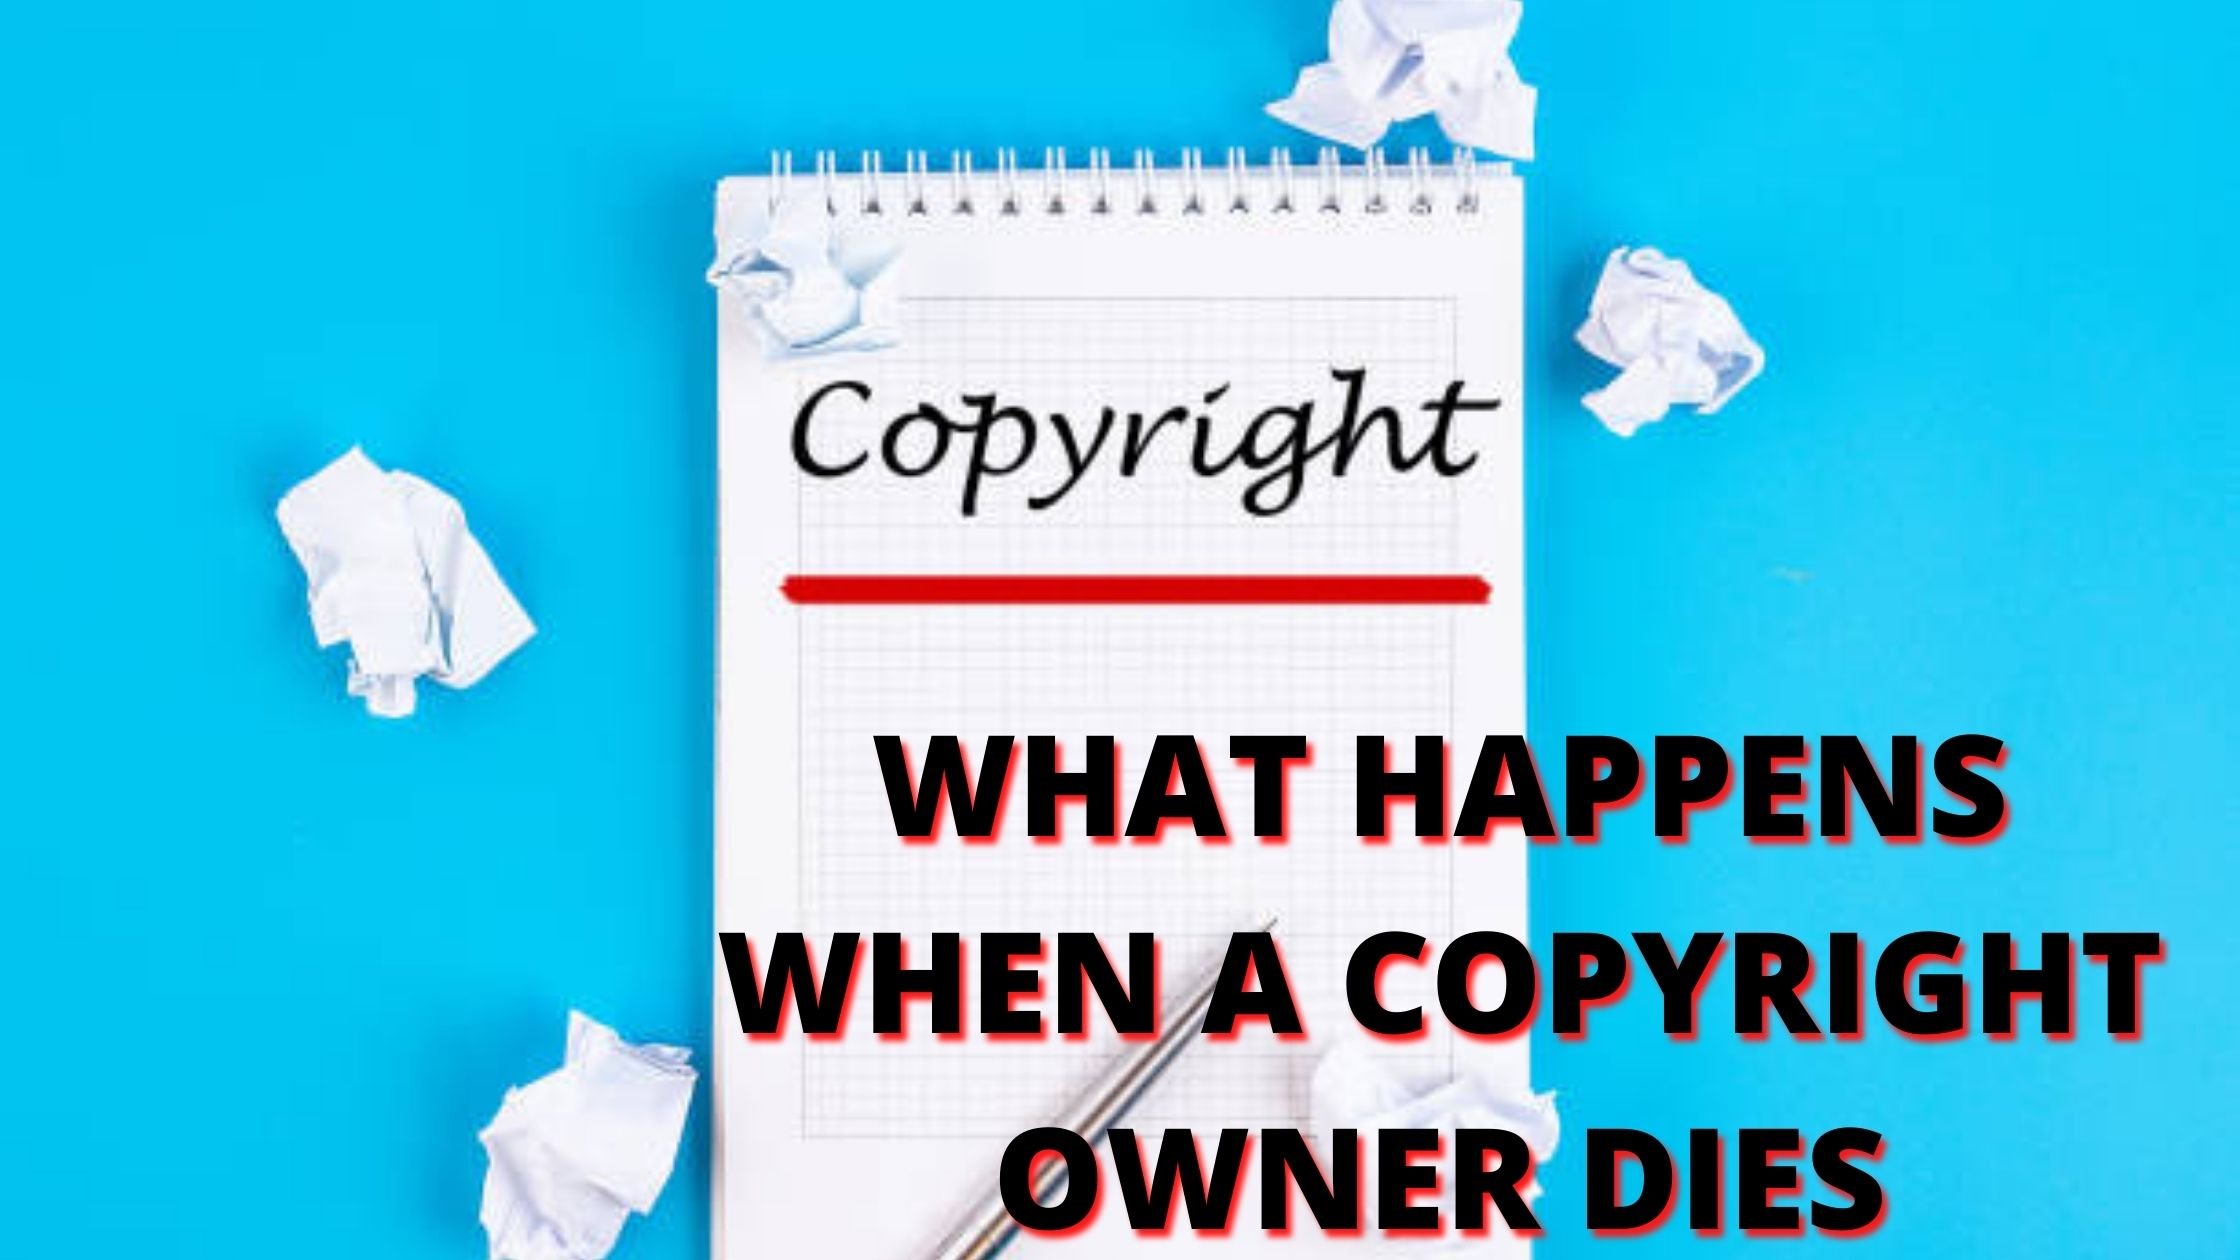 WHAT HAPPENS WHEN A COPYRIGHT OWNER DIES